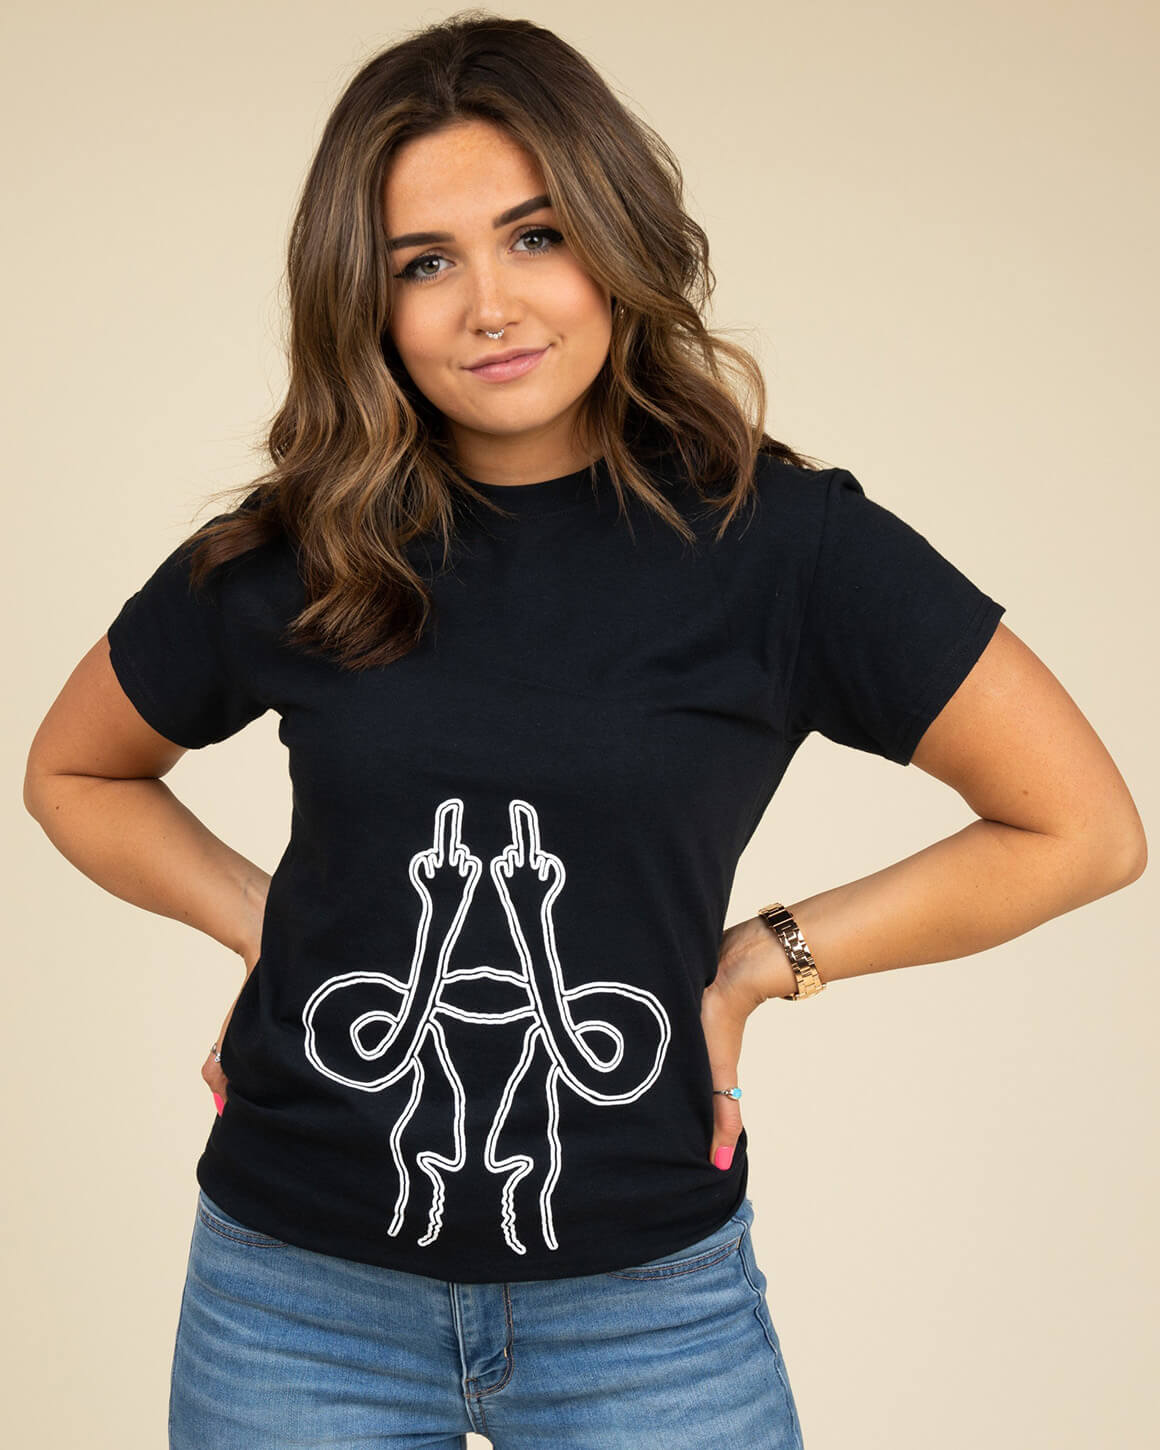 Girl with hands on hips wearing black uterus middle finger shirt